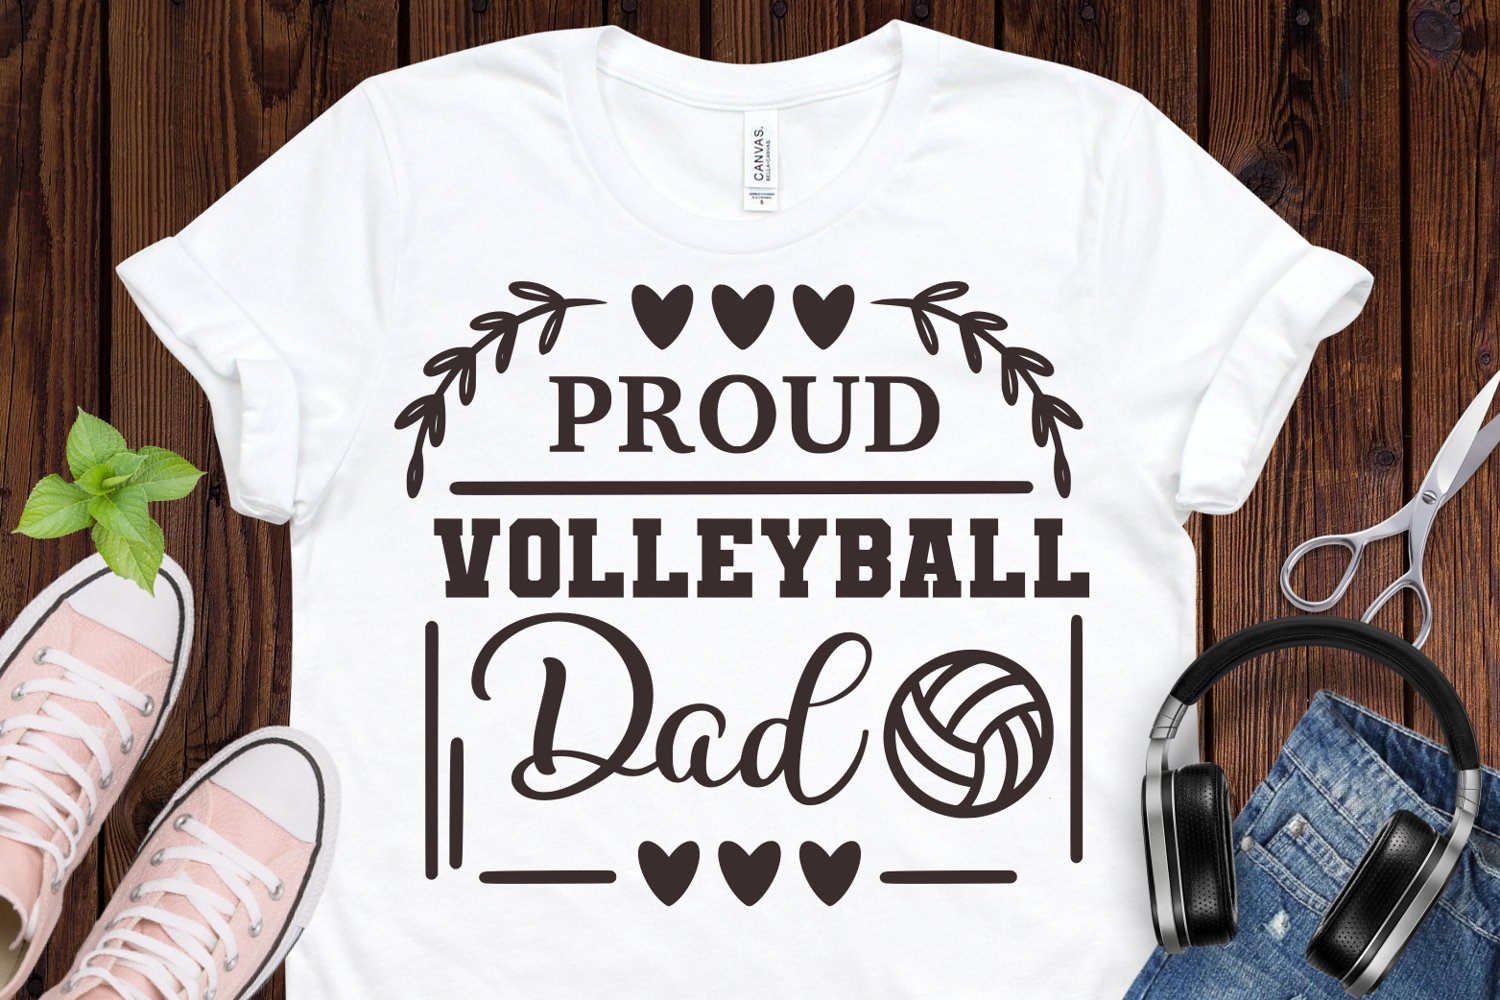 Proud volleyball dad - t-shirt design.